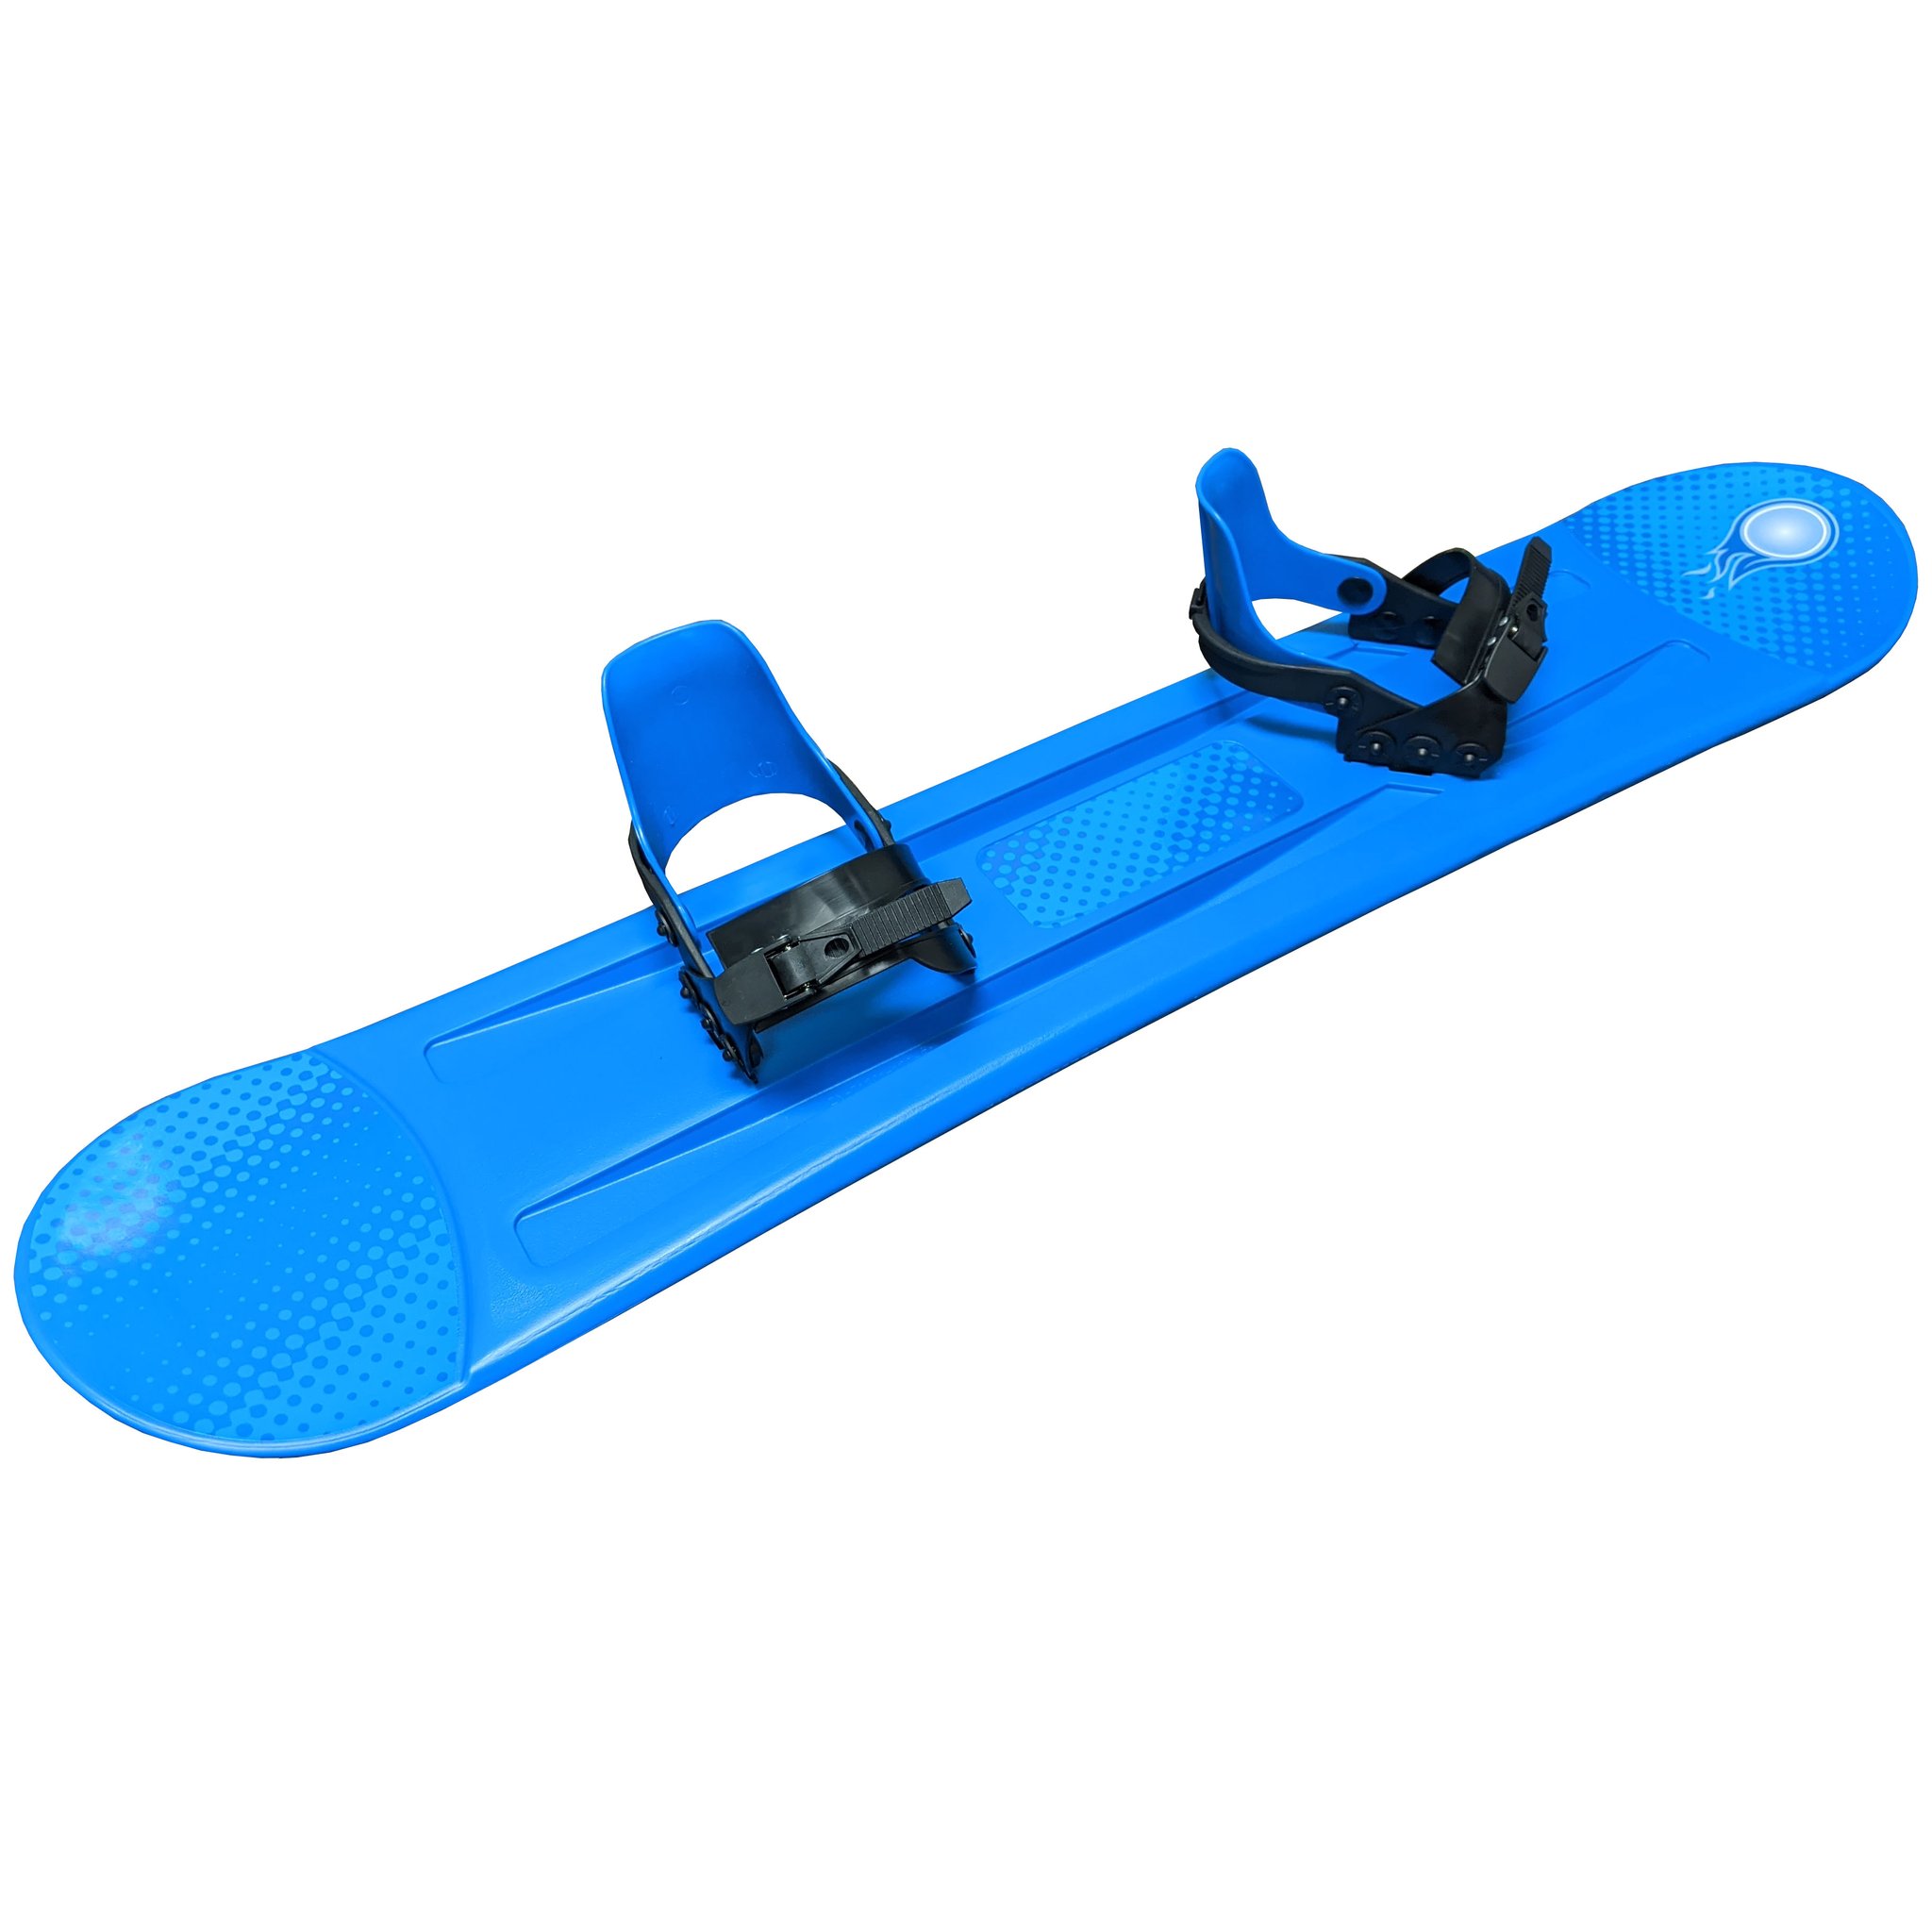 Grizzly Snow 120cm Deluxe Kid's Beginner Blue Snowboard - image 1 of 2